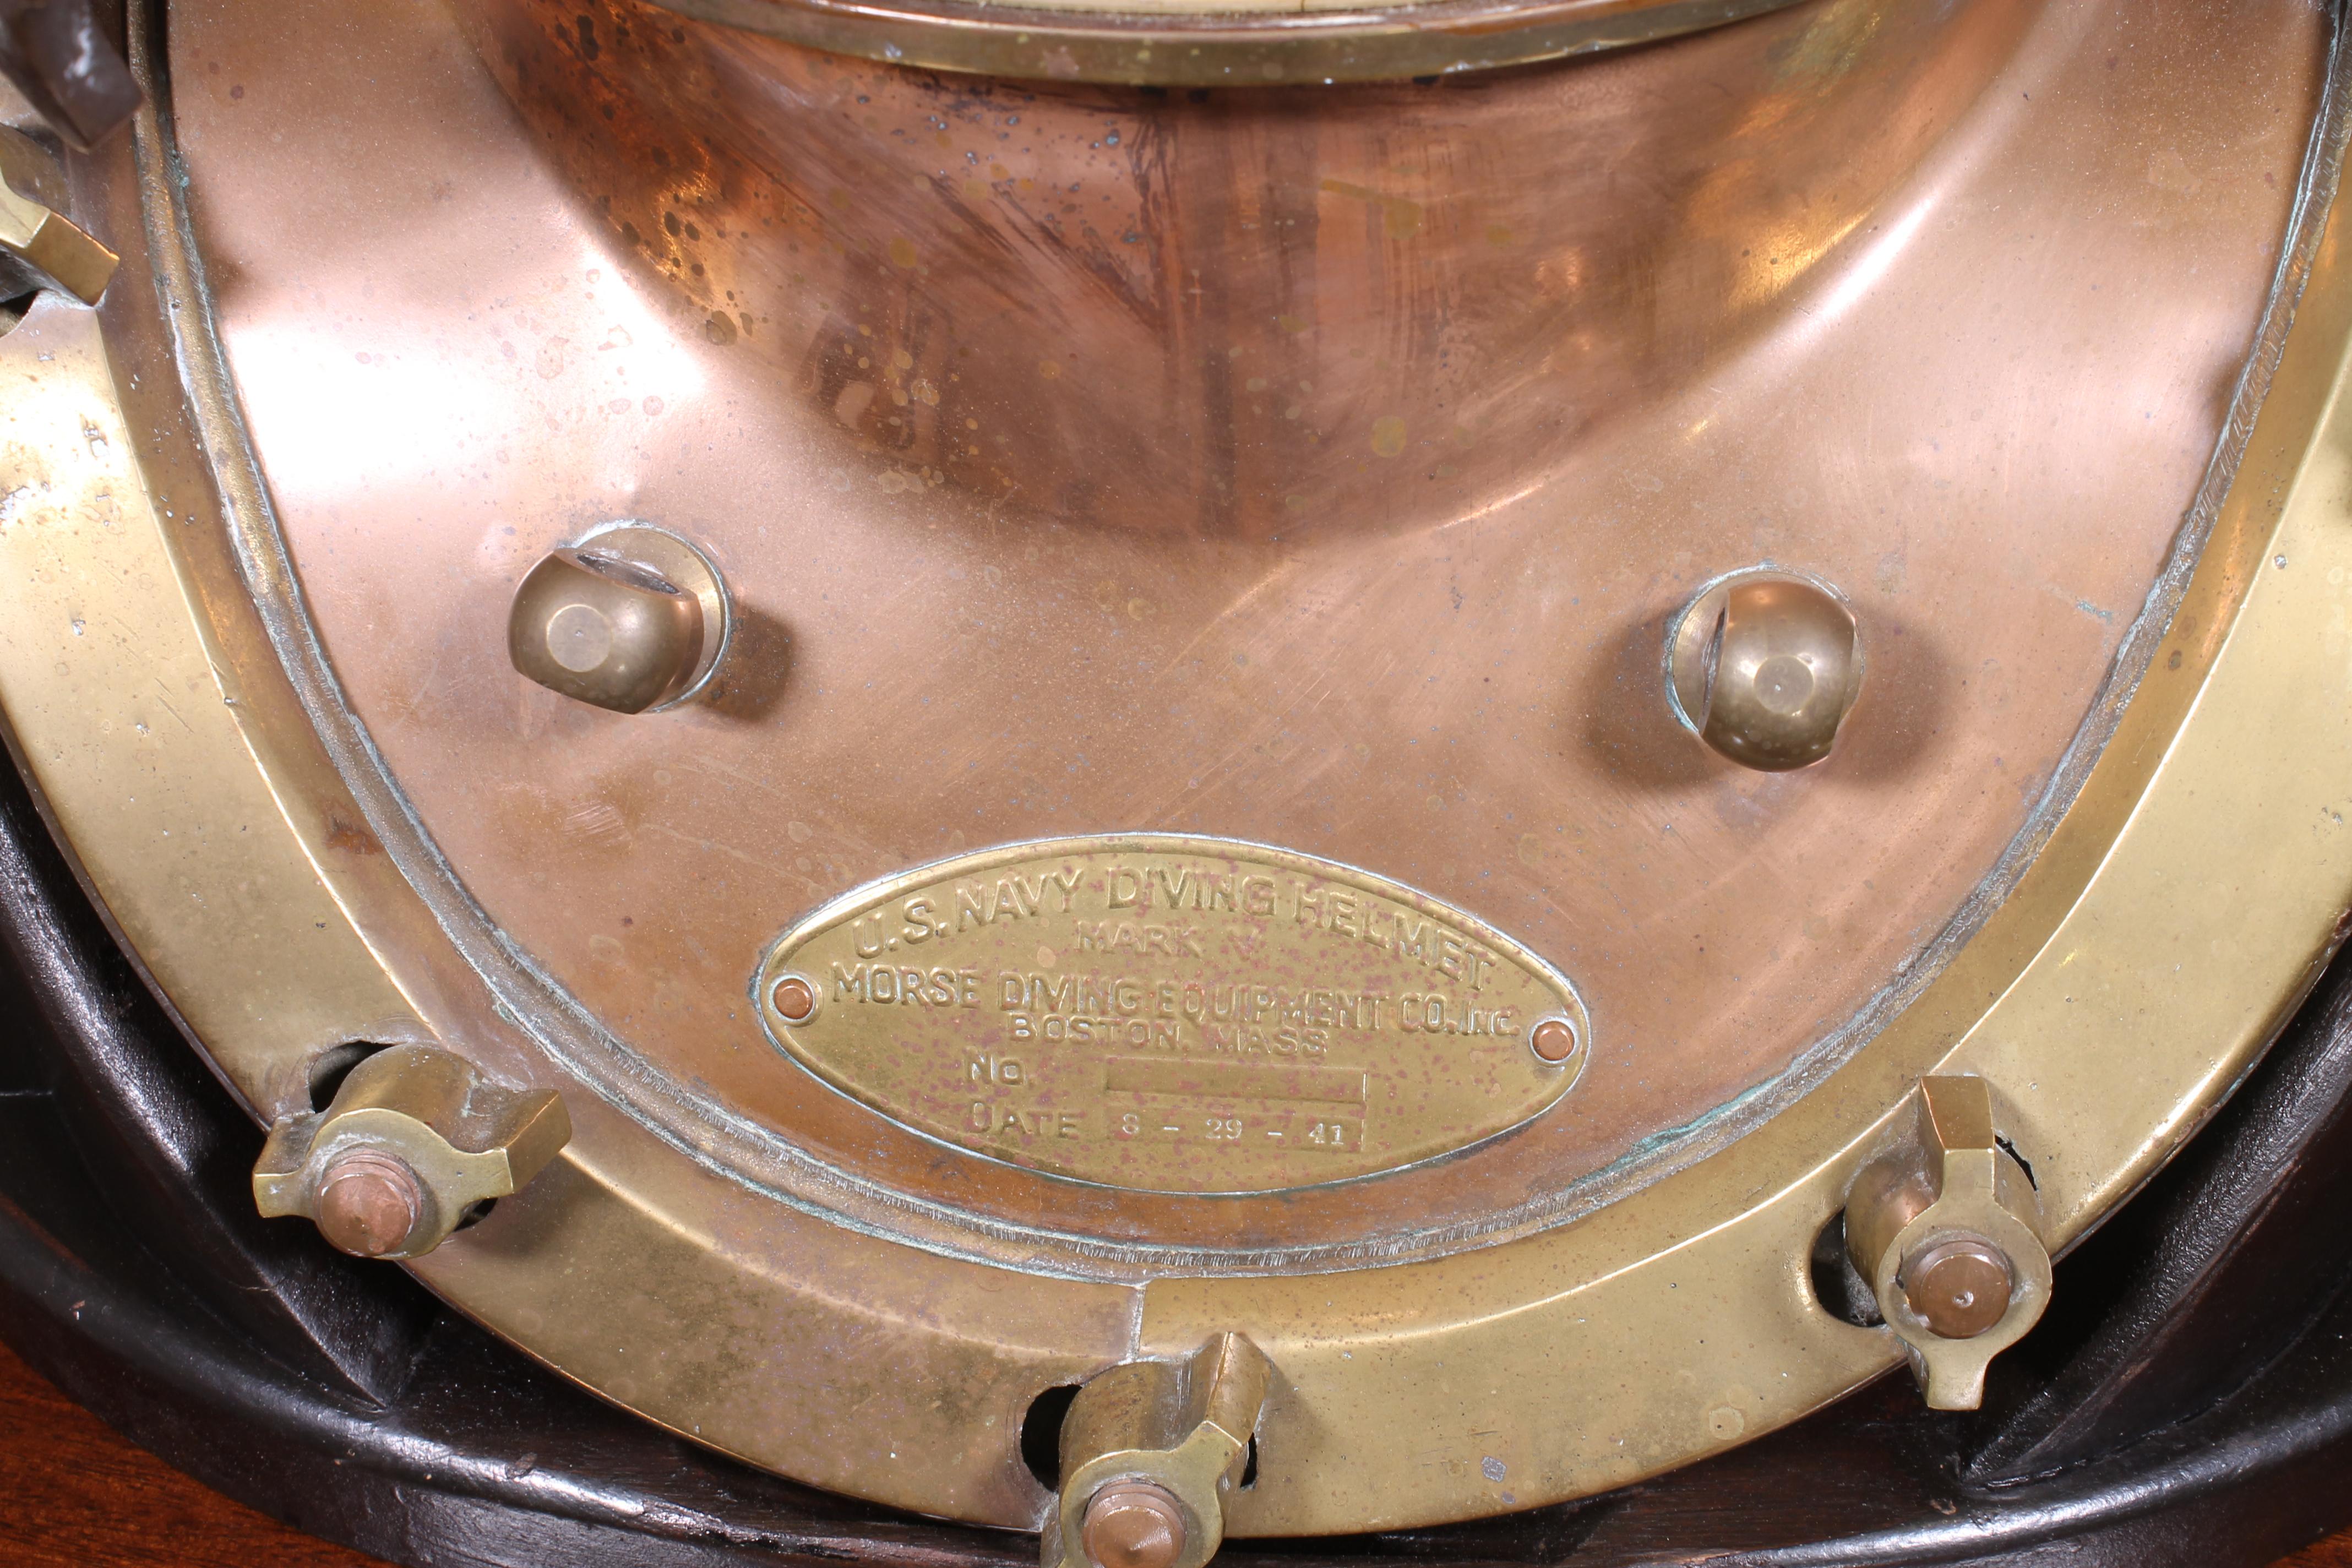 Elegant scuba mask with its wooden base

We can find the following inscriptions.
US Navy Diving Helmet
V Mark
Morse diving equipment Boston MA
1941

Delivery in Belgium, France and worldwide.
Visible in our showroom at 41Rue Henri